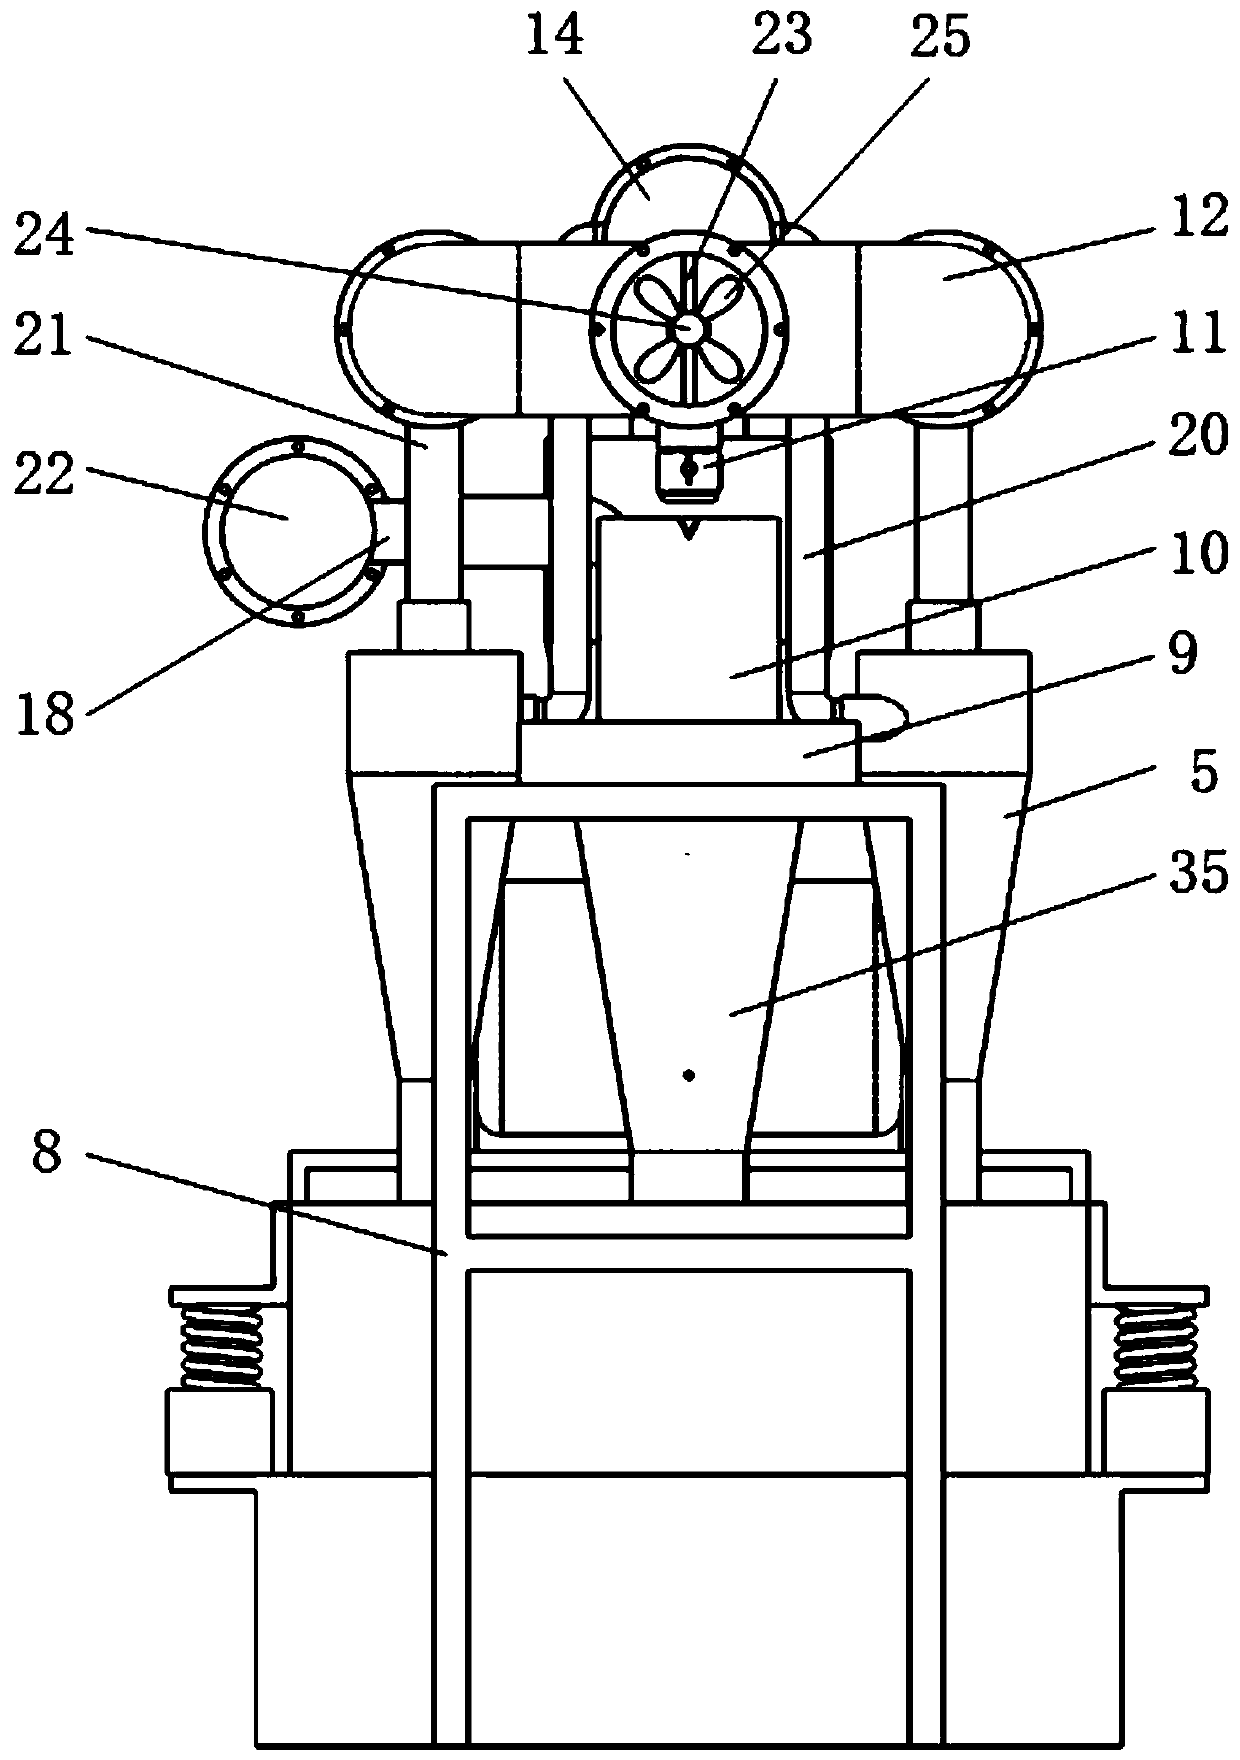 A drilling fluid mud and sand removal device